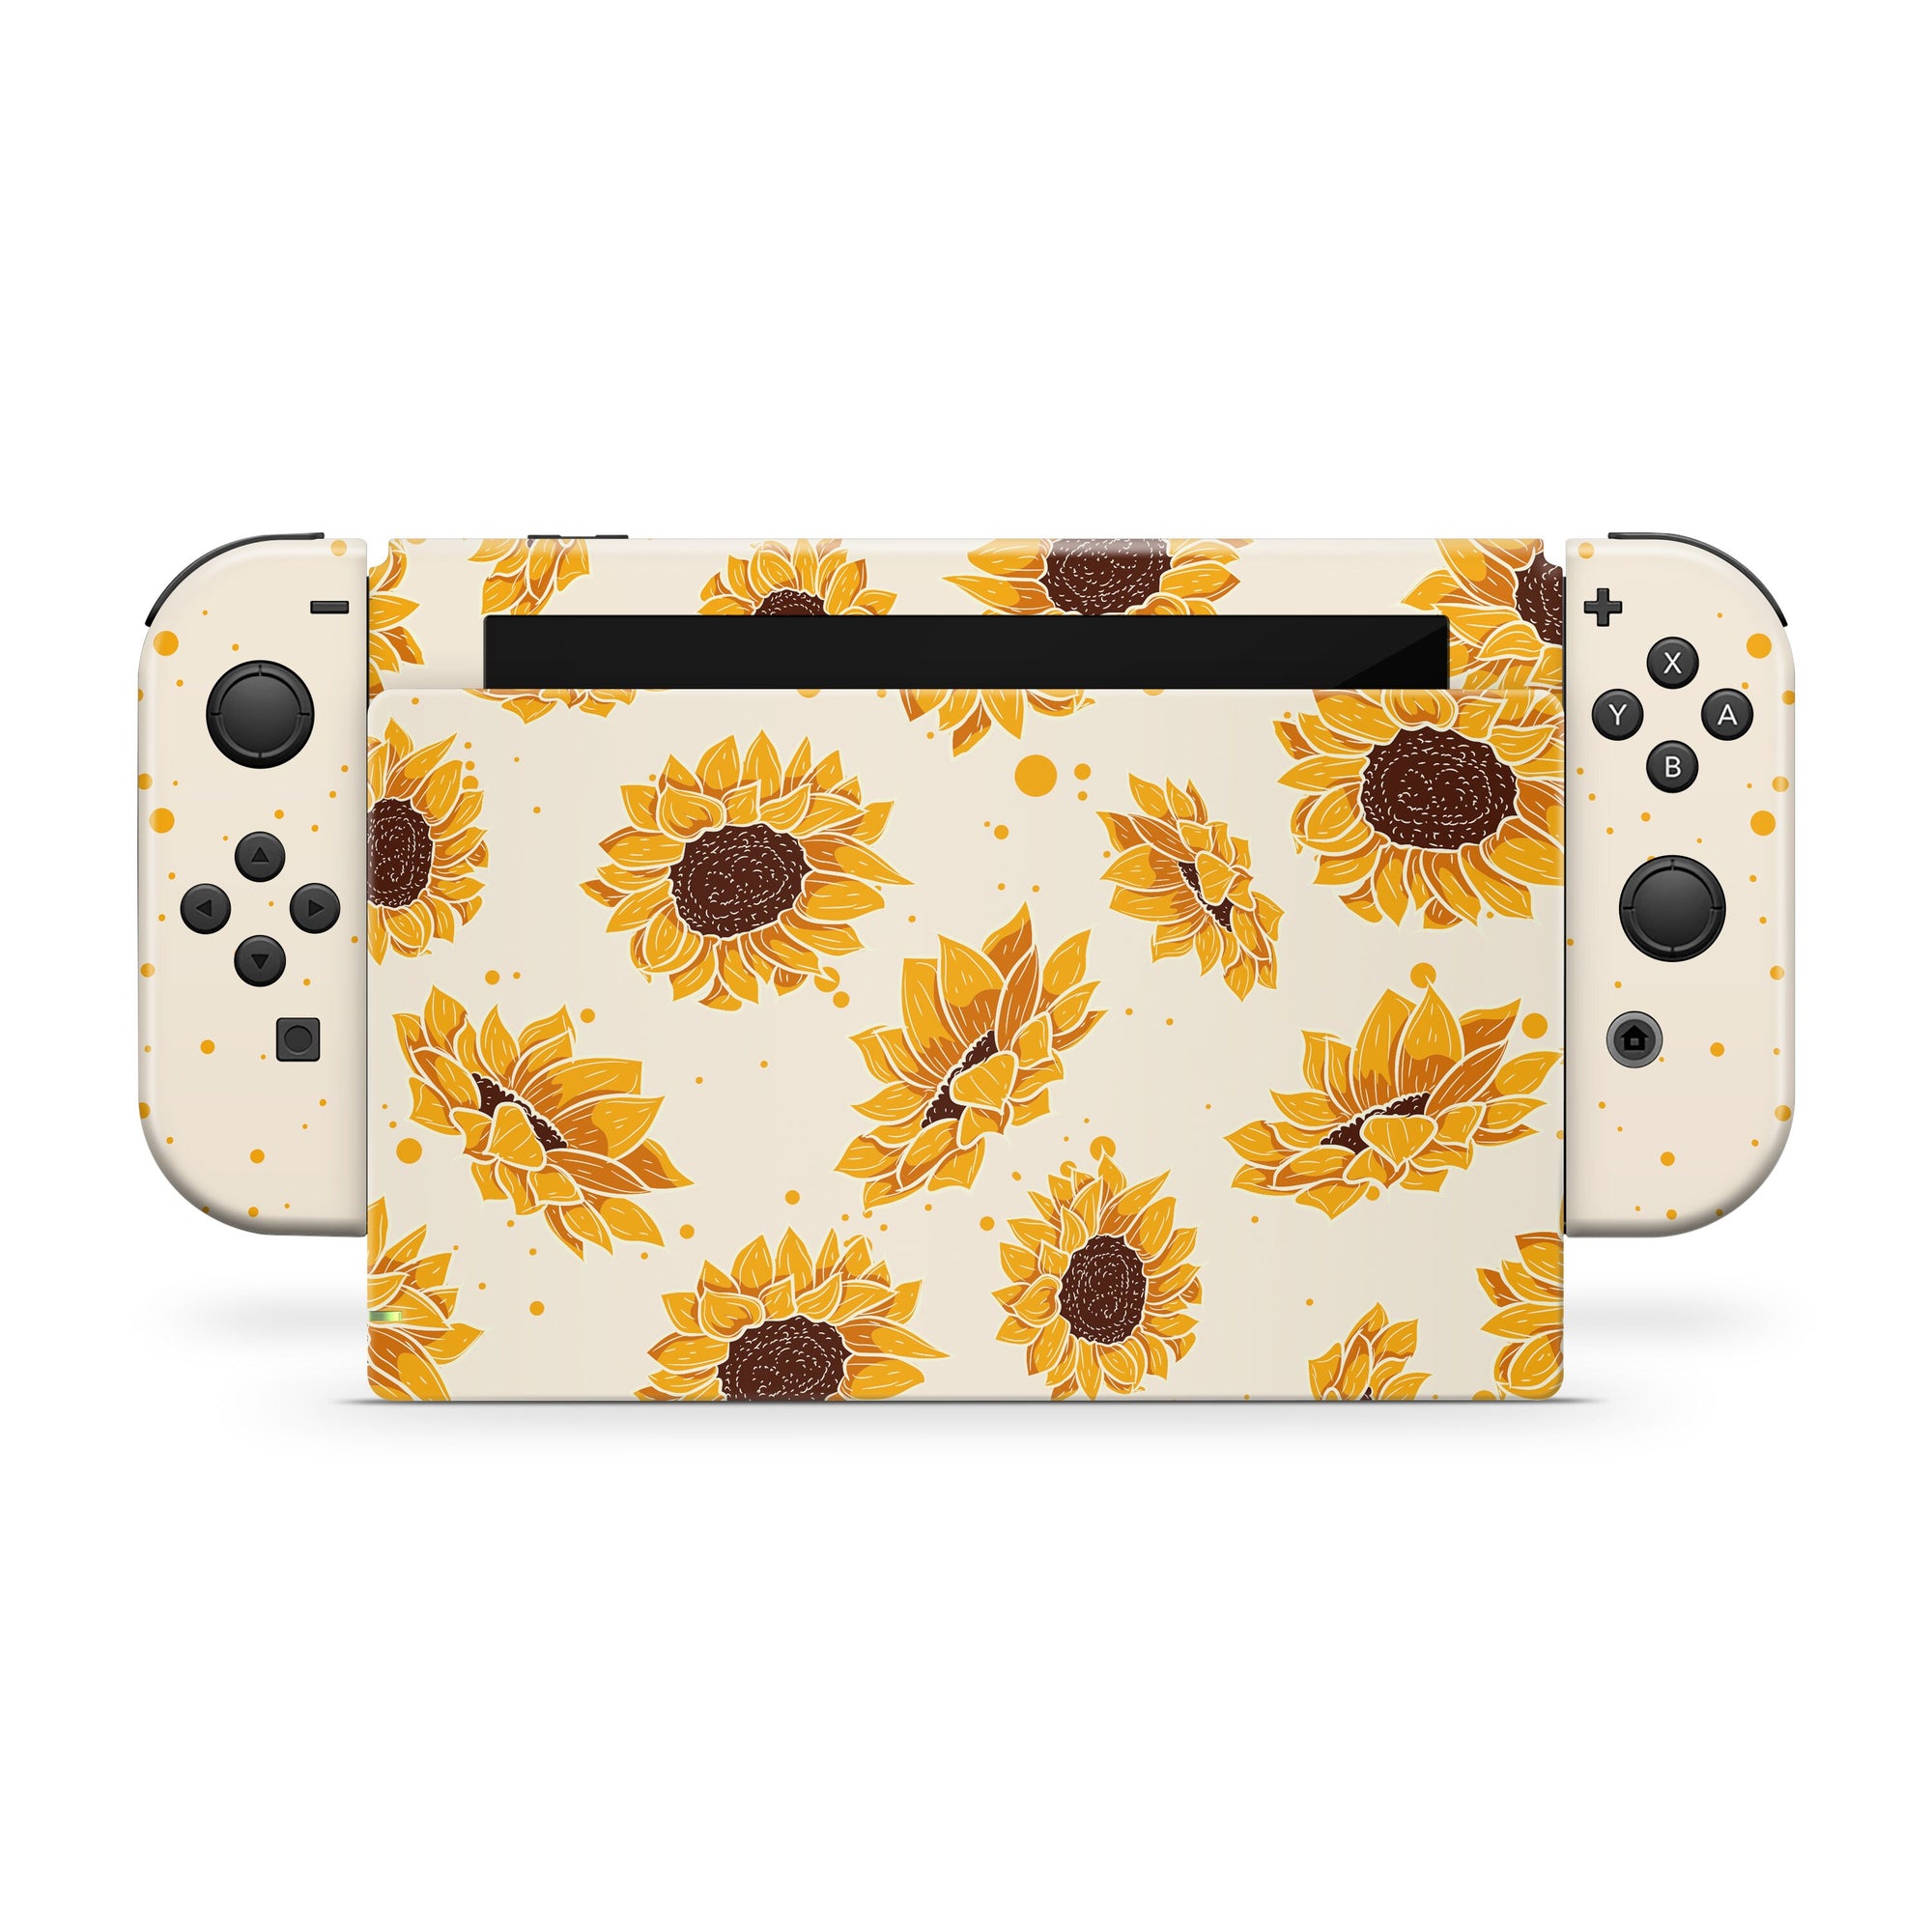  Tacky Design Retro Skin Compatible with Nintendo Switch Skin -  Premium Vinyl 3M Brown Colorwave,Color Blocking Nintendo Switch Stickers  Set - Switch Skin for Console, Dock, Joy Con - Decal Full